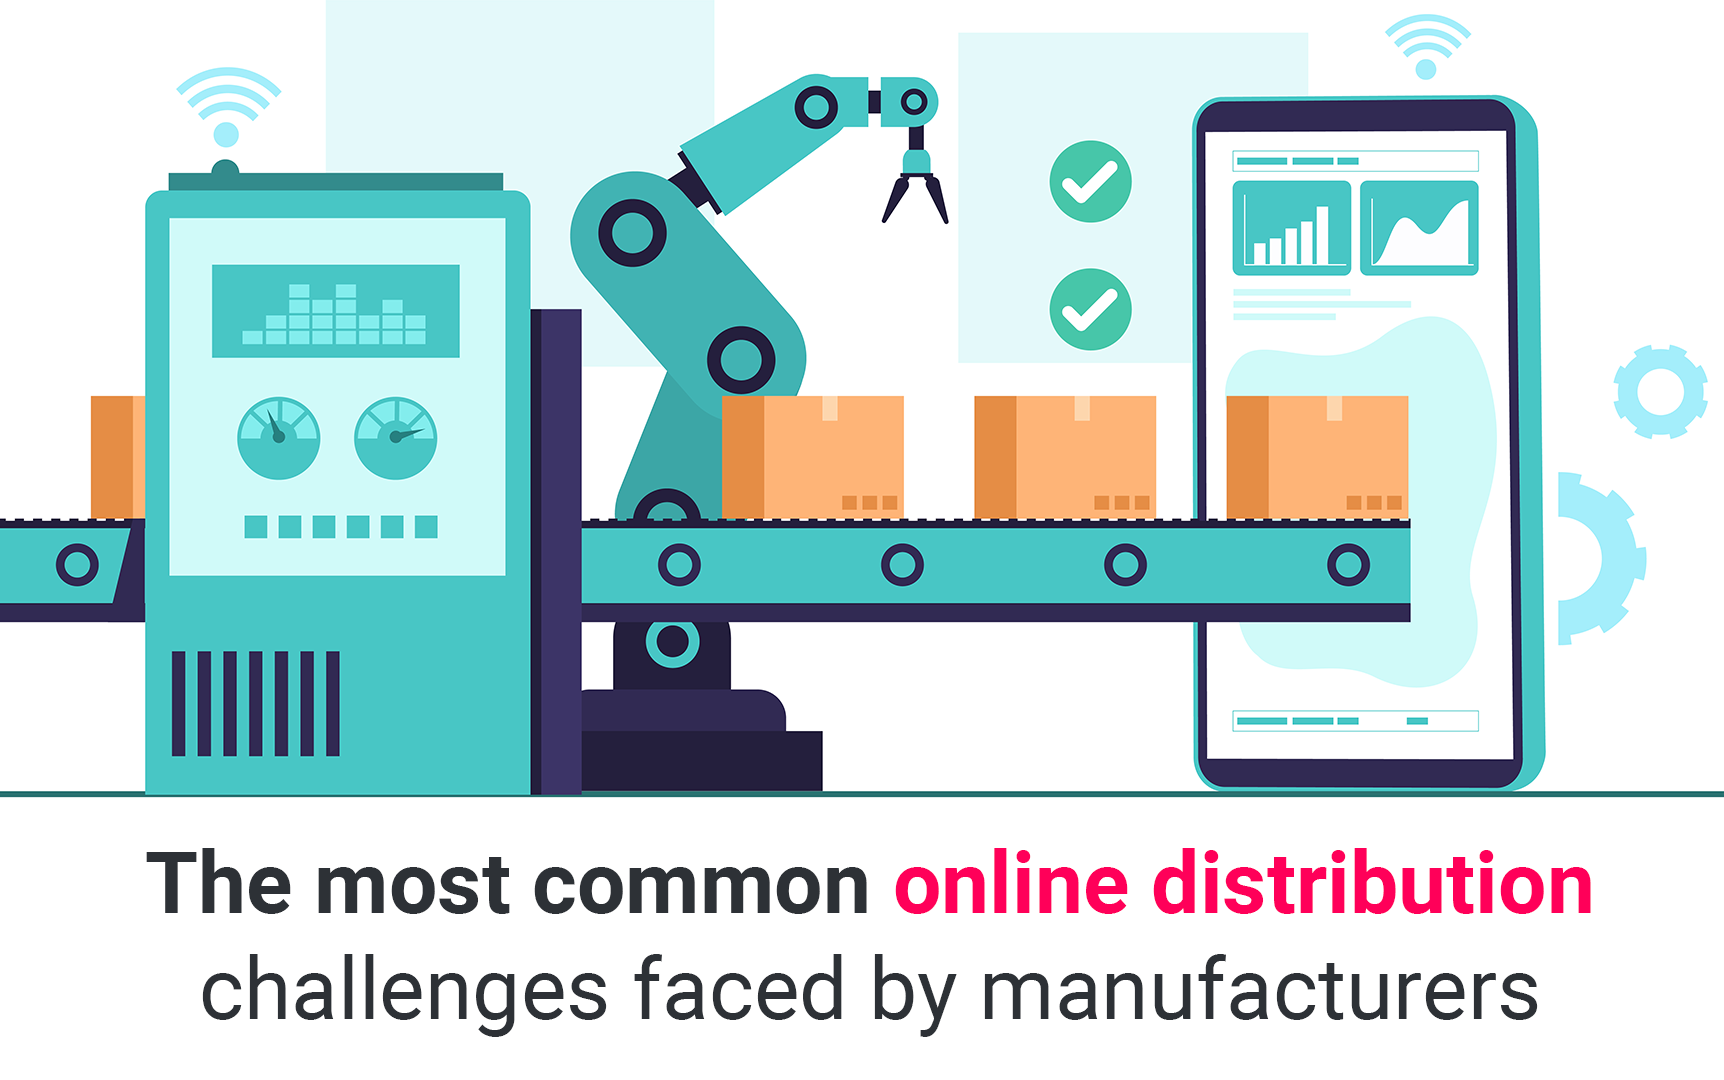 The most common online distribution challenges faced by manufacturers